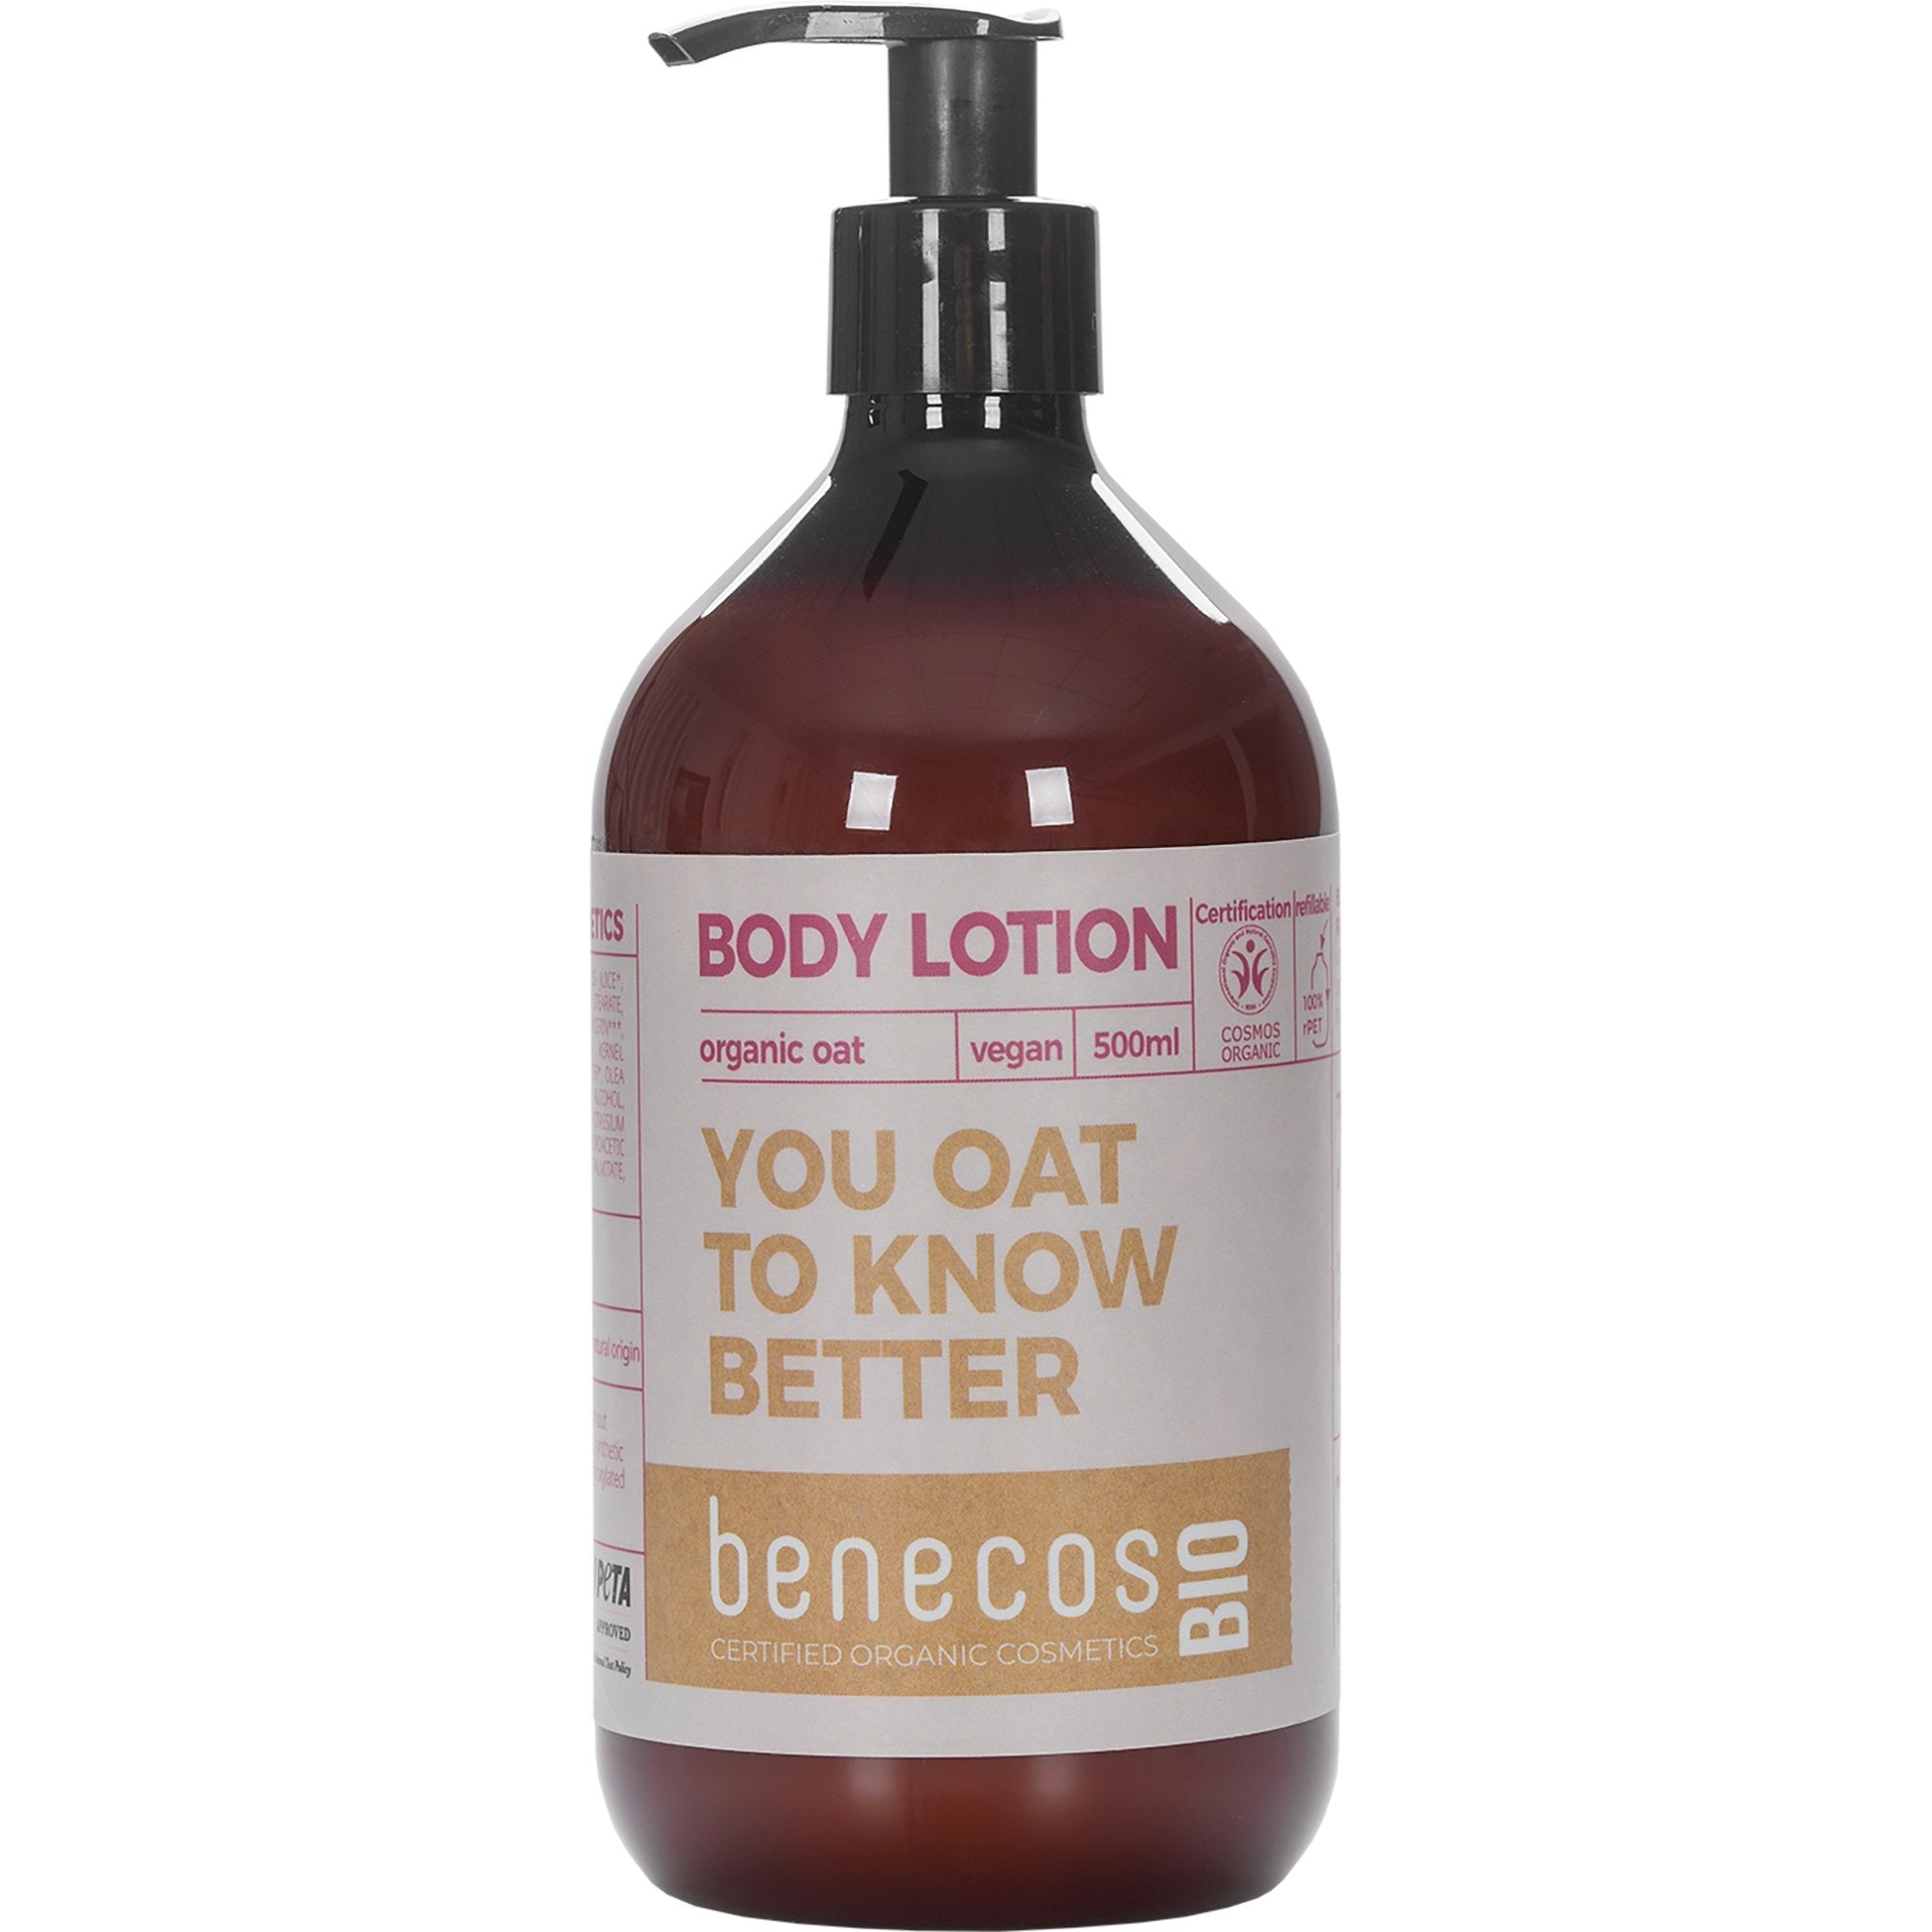 NEW You Oat To Know Better Body Lotion - mypure.co.uk